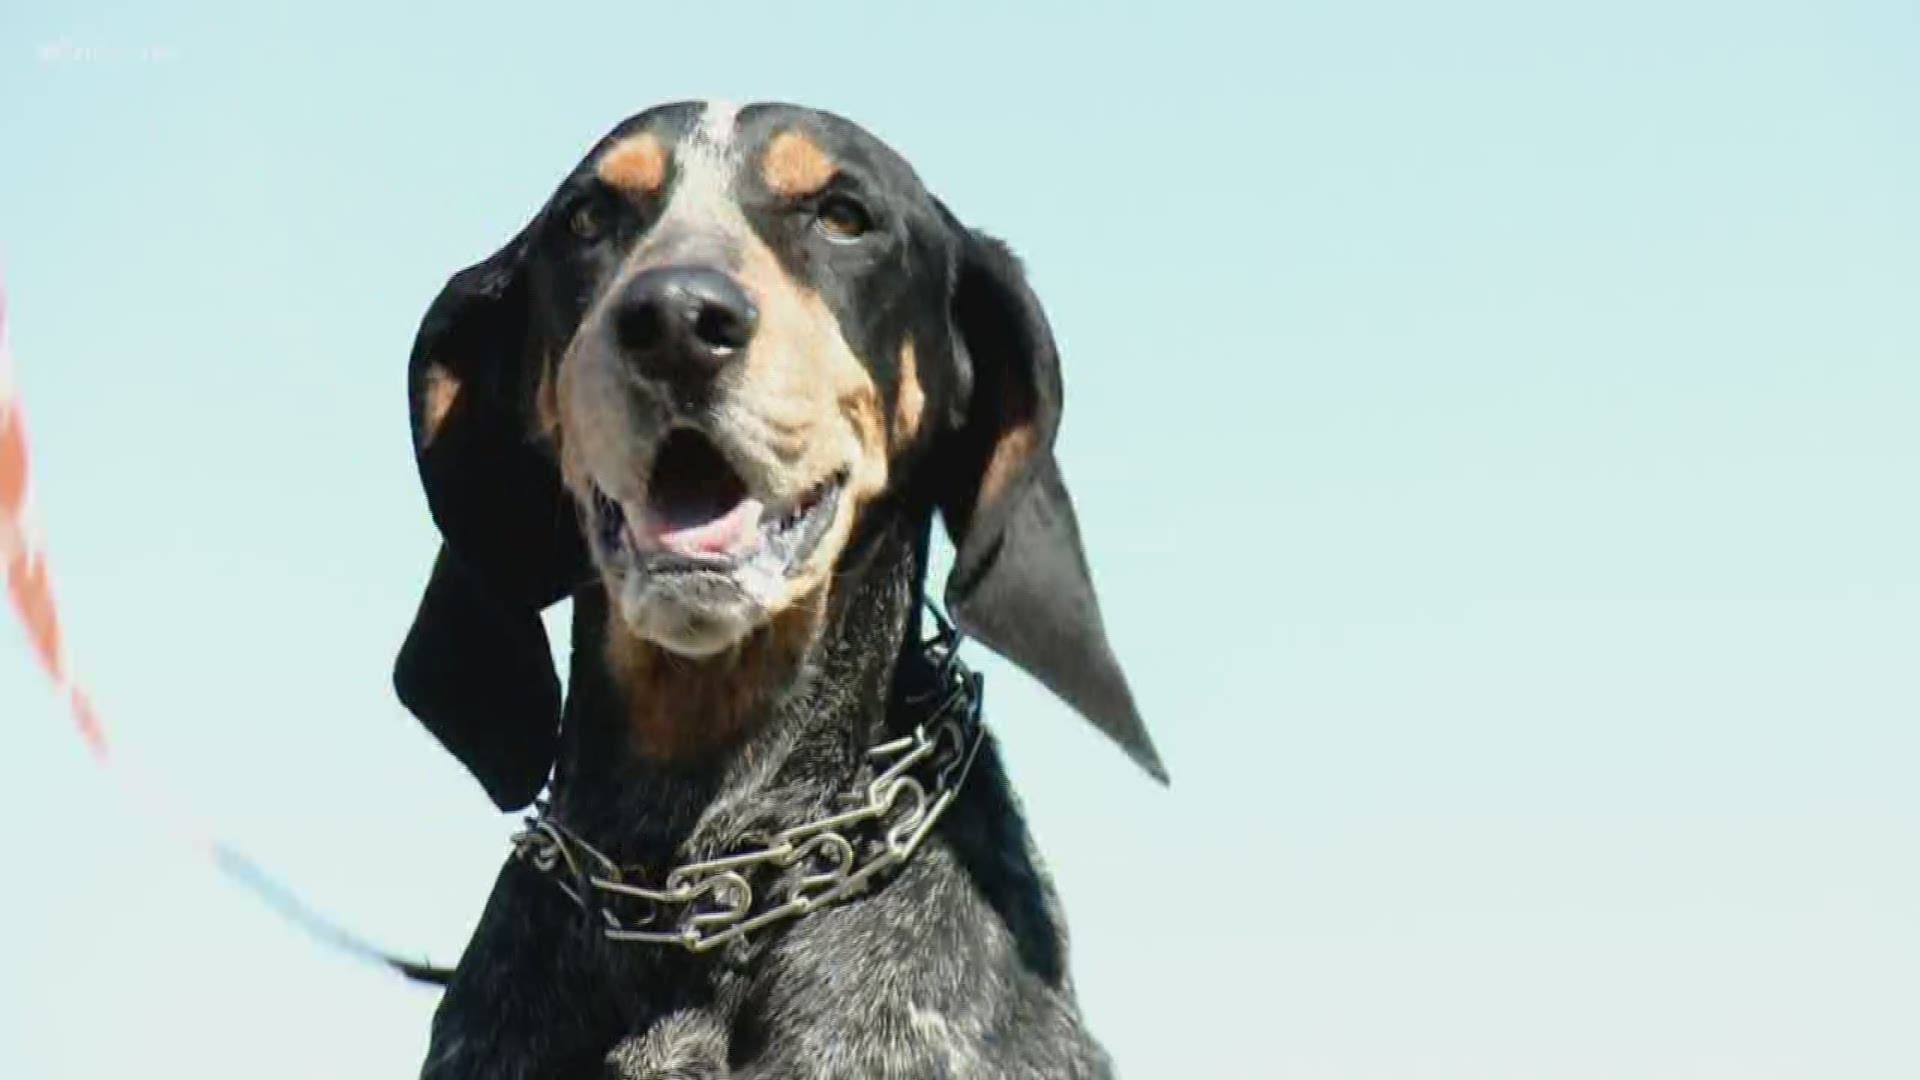 This week the Bluetick Coonhound became the official state dog of Tennessee. 10News reporter Jim Matheny got reactions from the top dog in Big Orange Country.